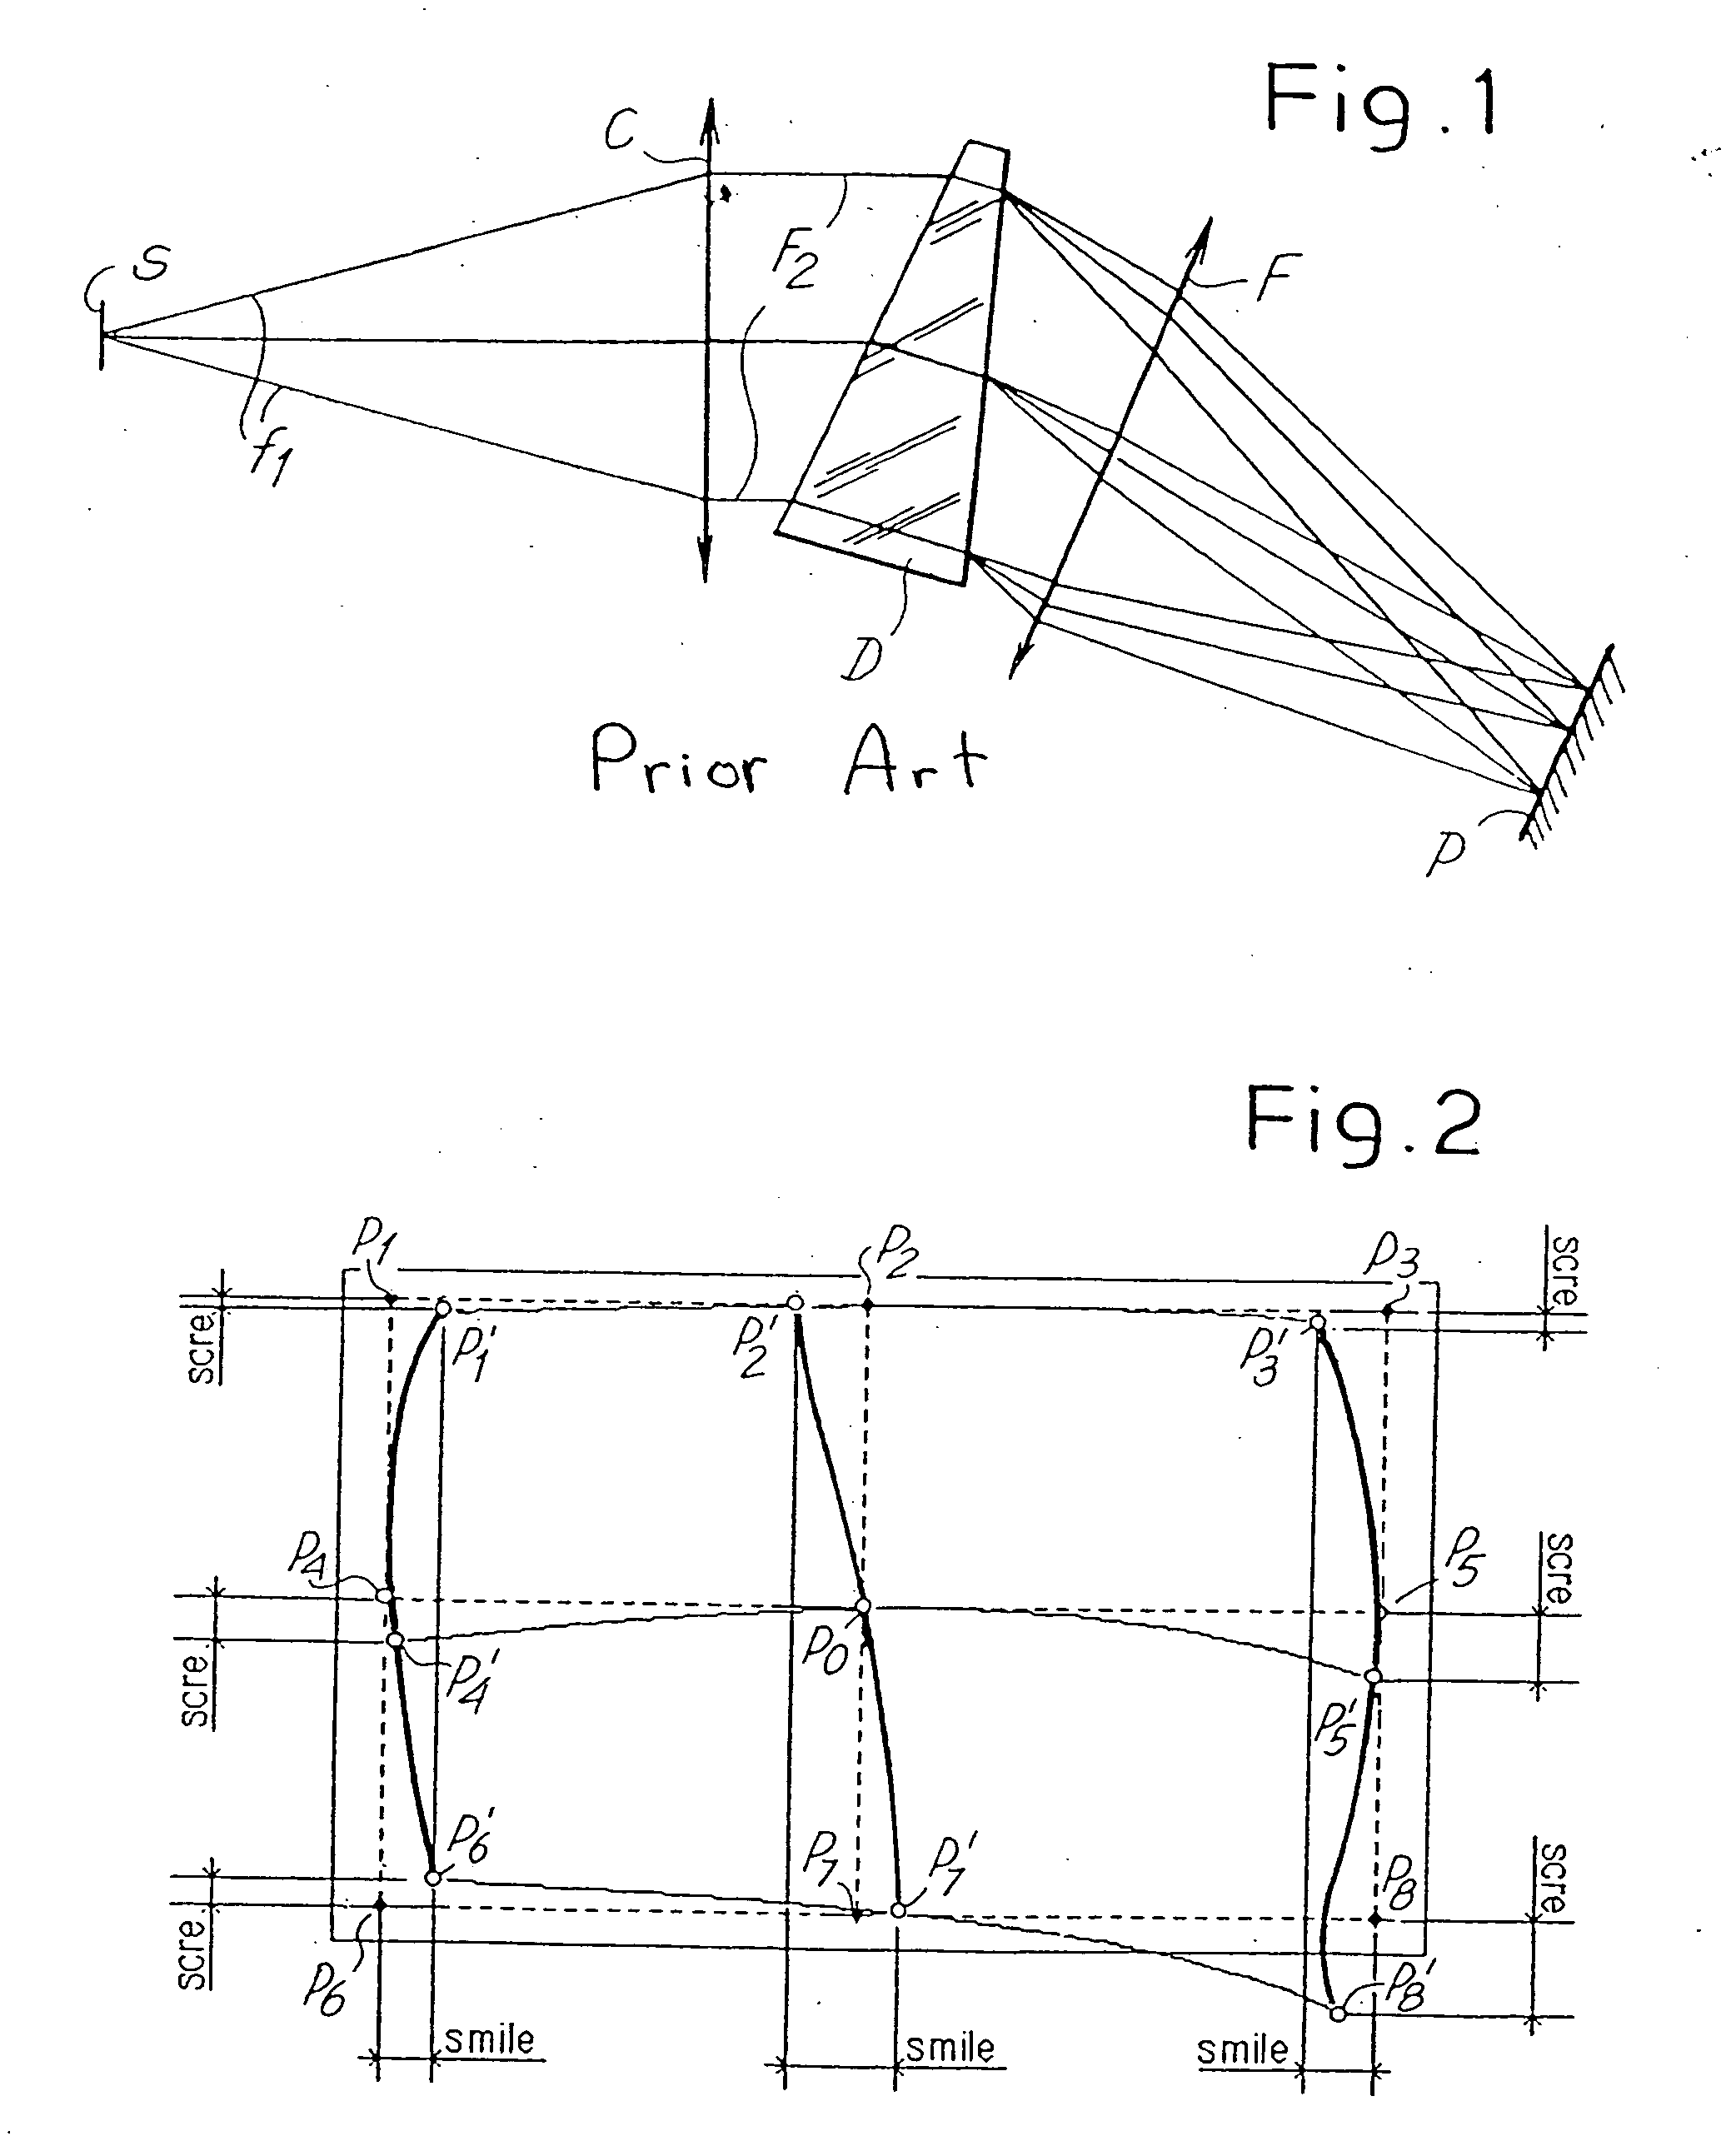 Wide-band spectrometer with objective comprising an aspherical corrector mirror